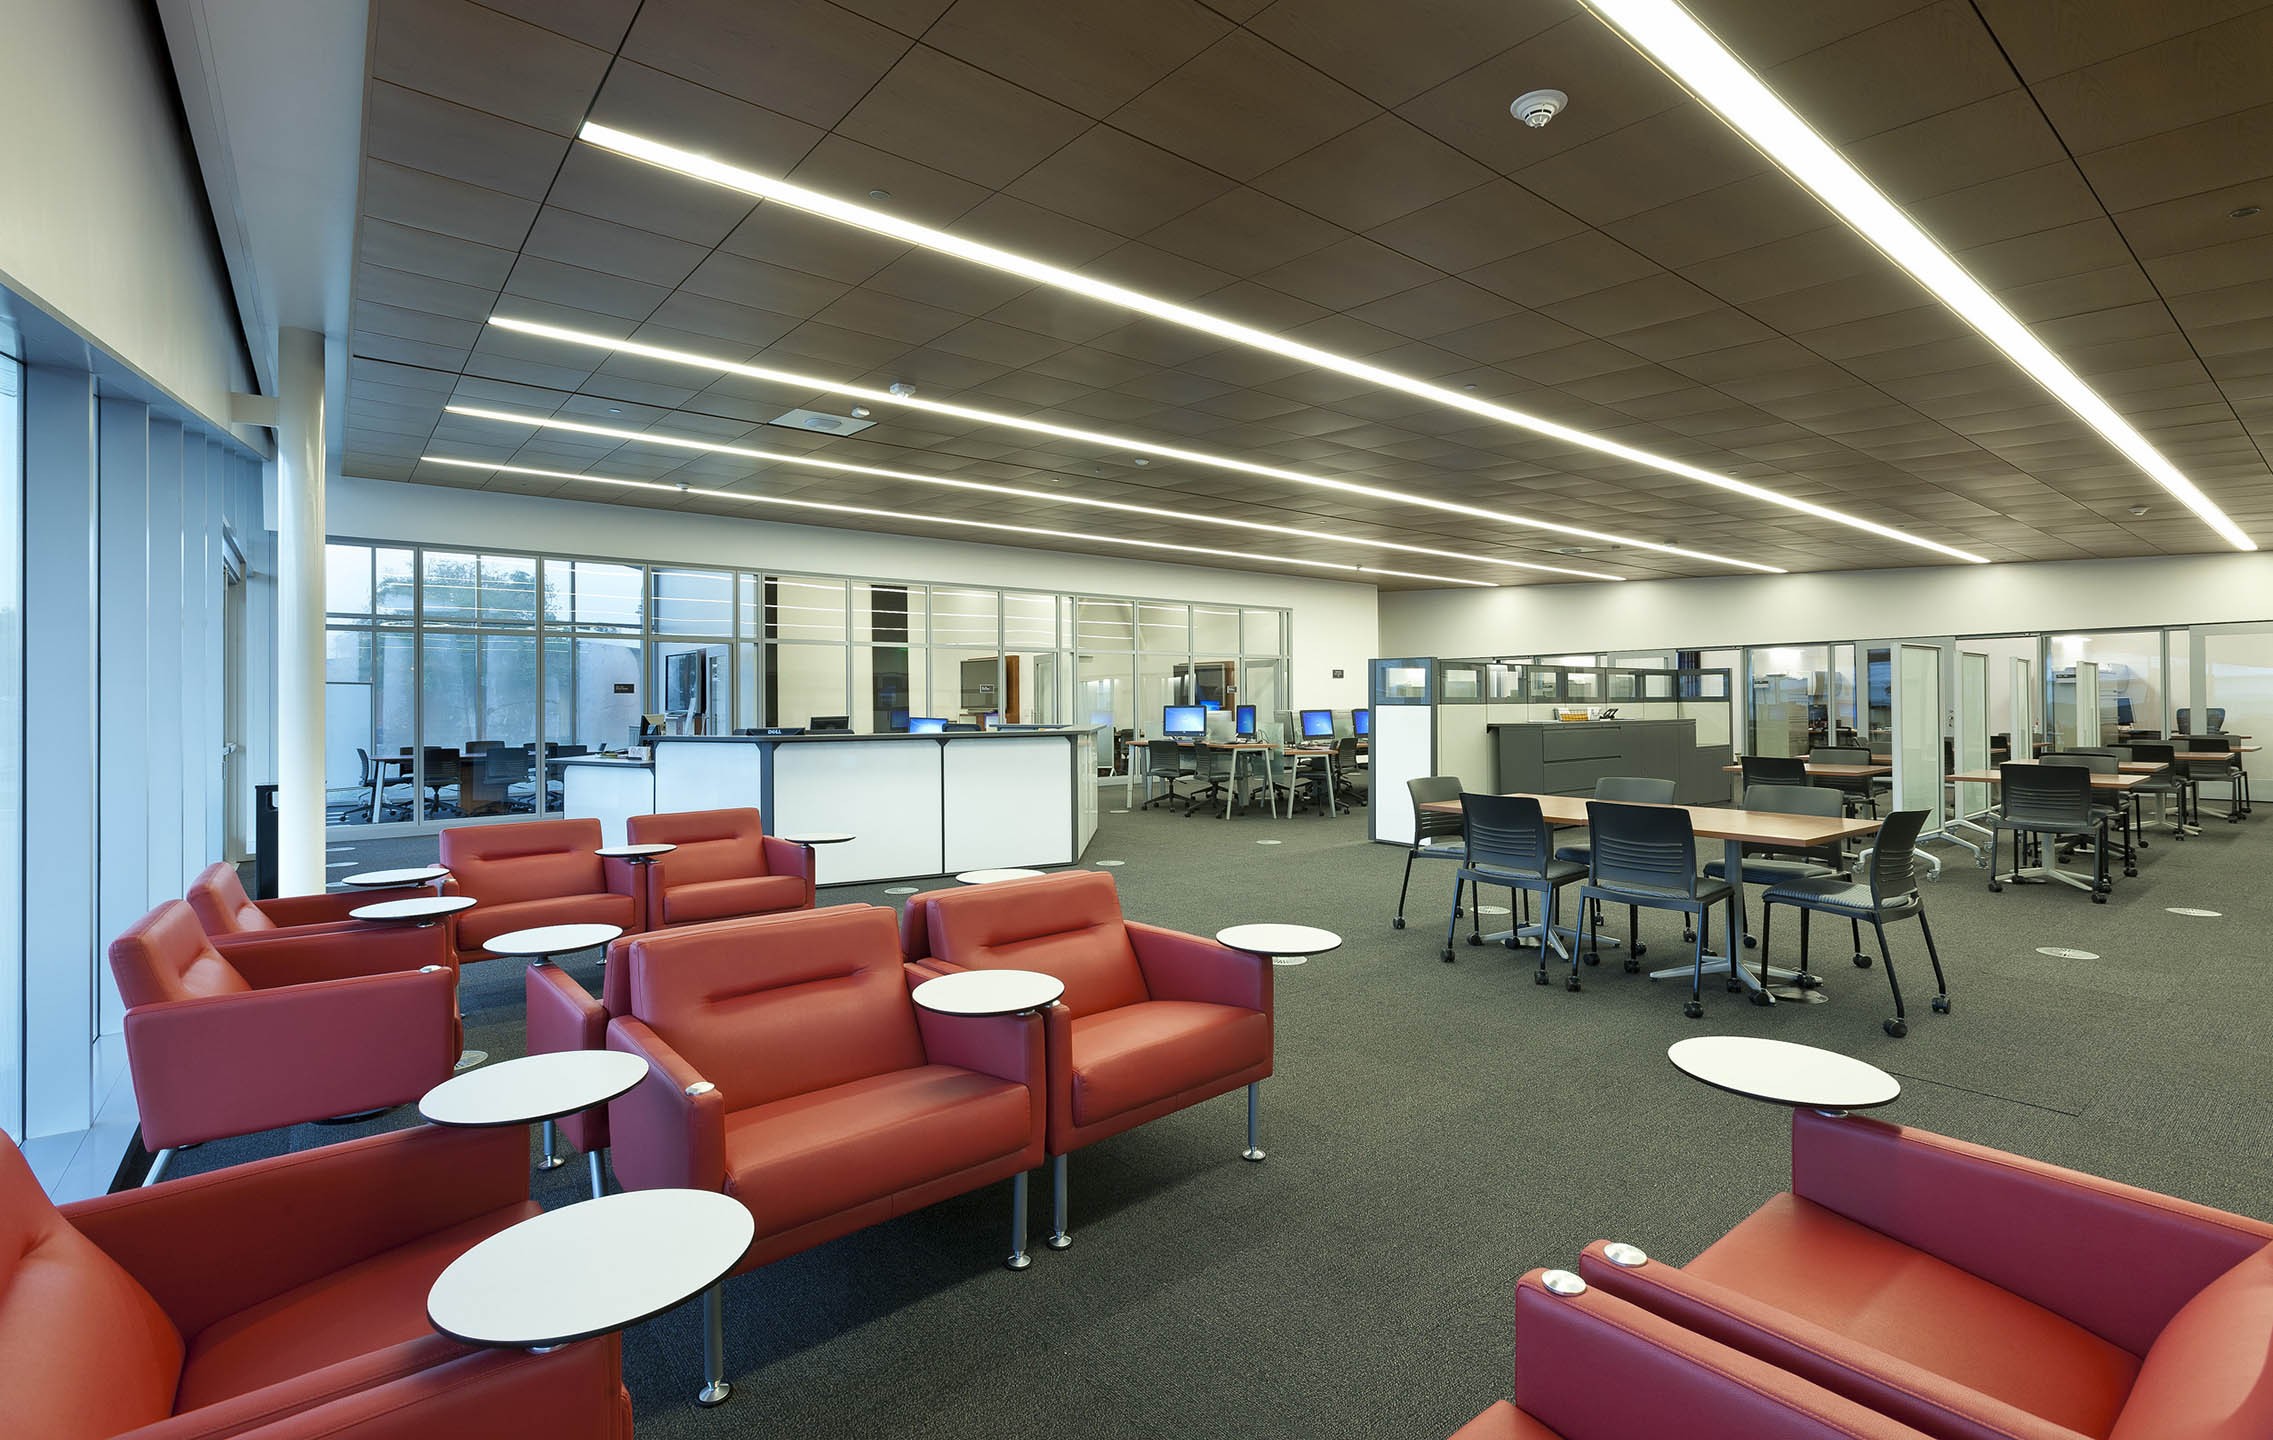 Inside the Teaching and Learning Center